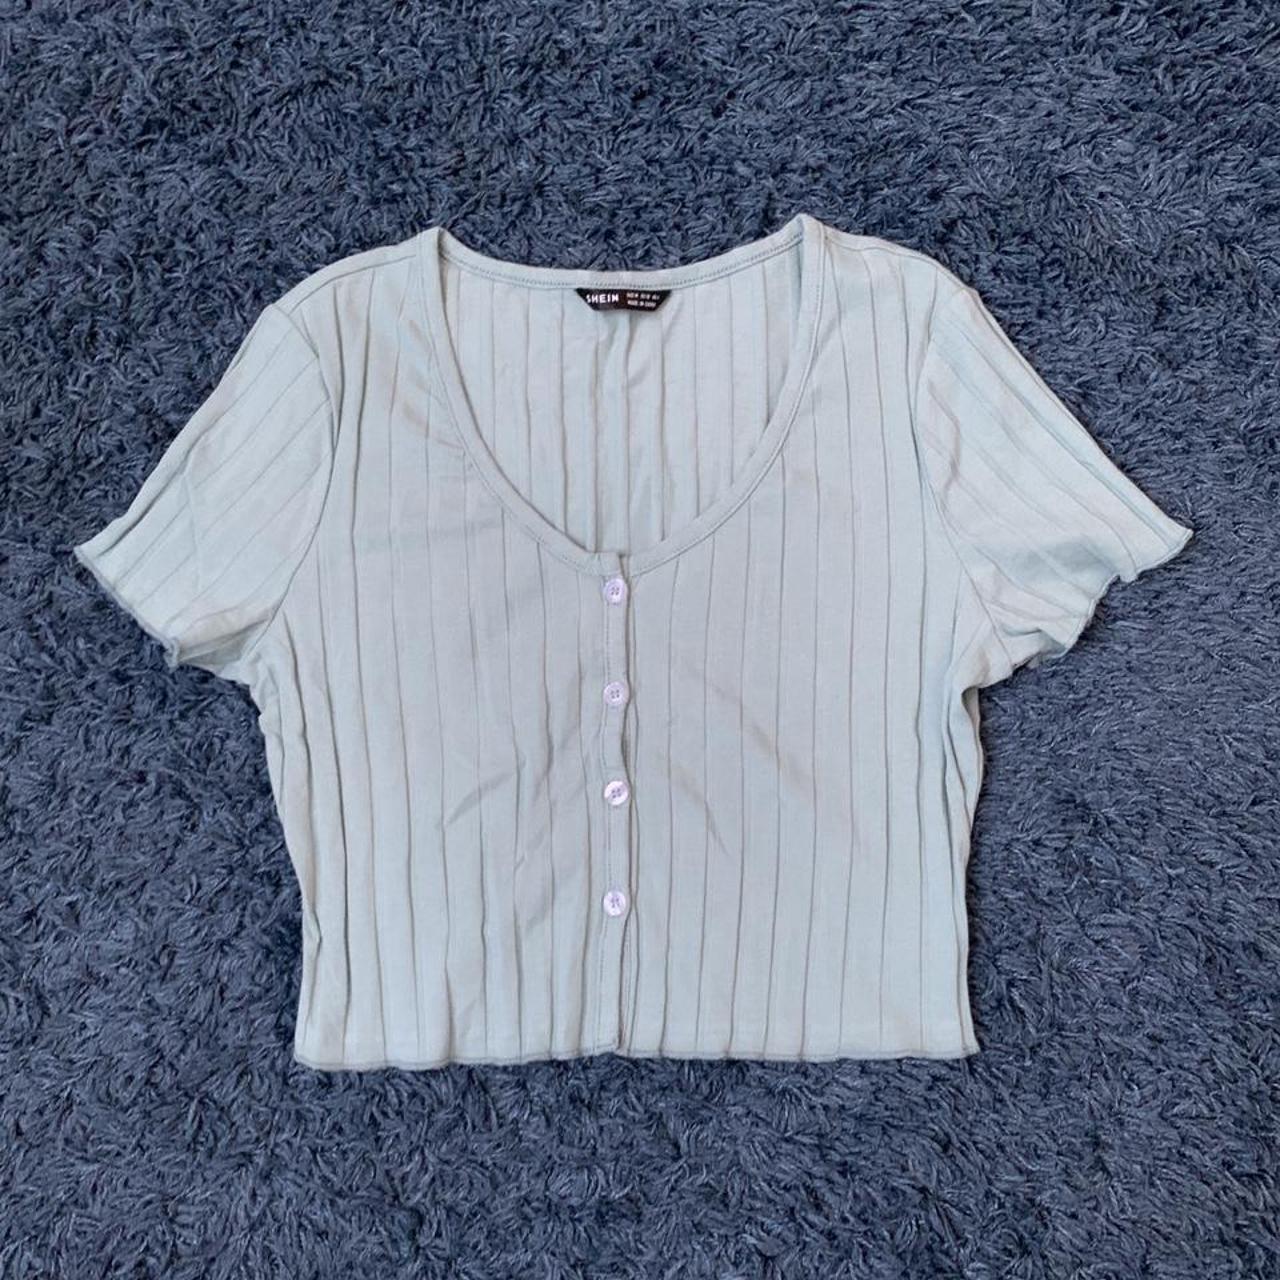 SHEIN sage button top • tried on once • size M,... - Depop